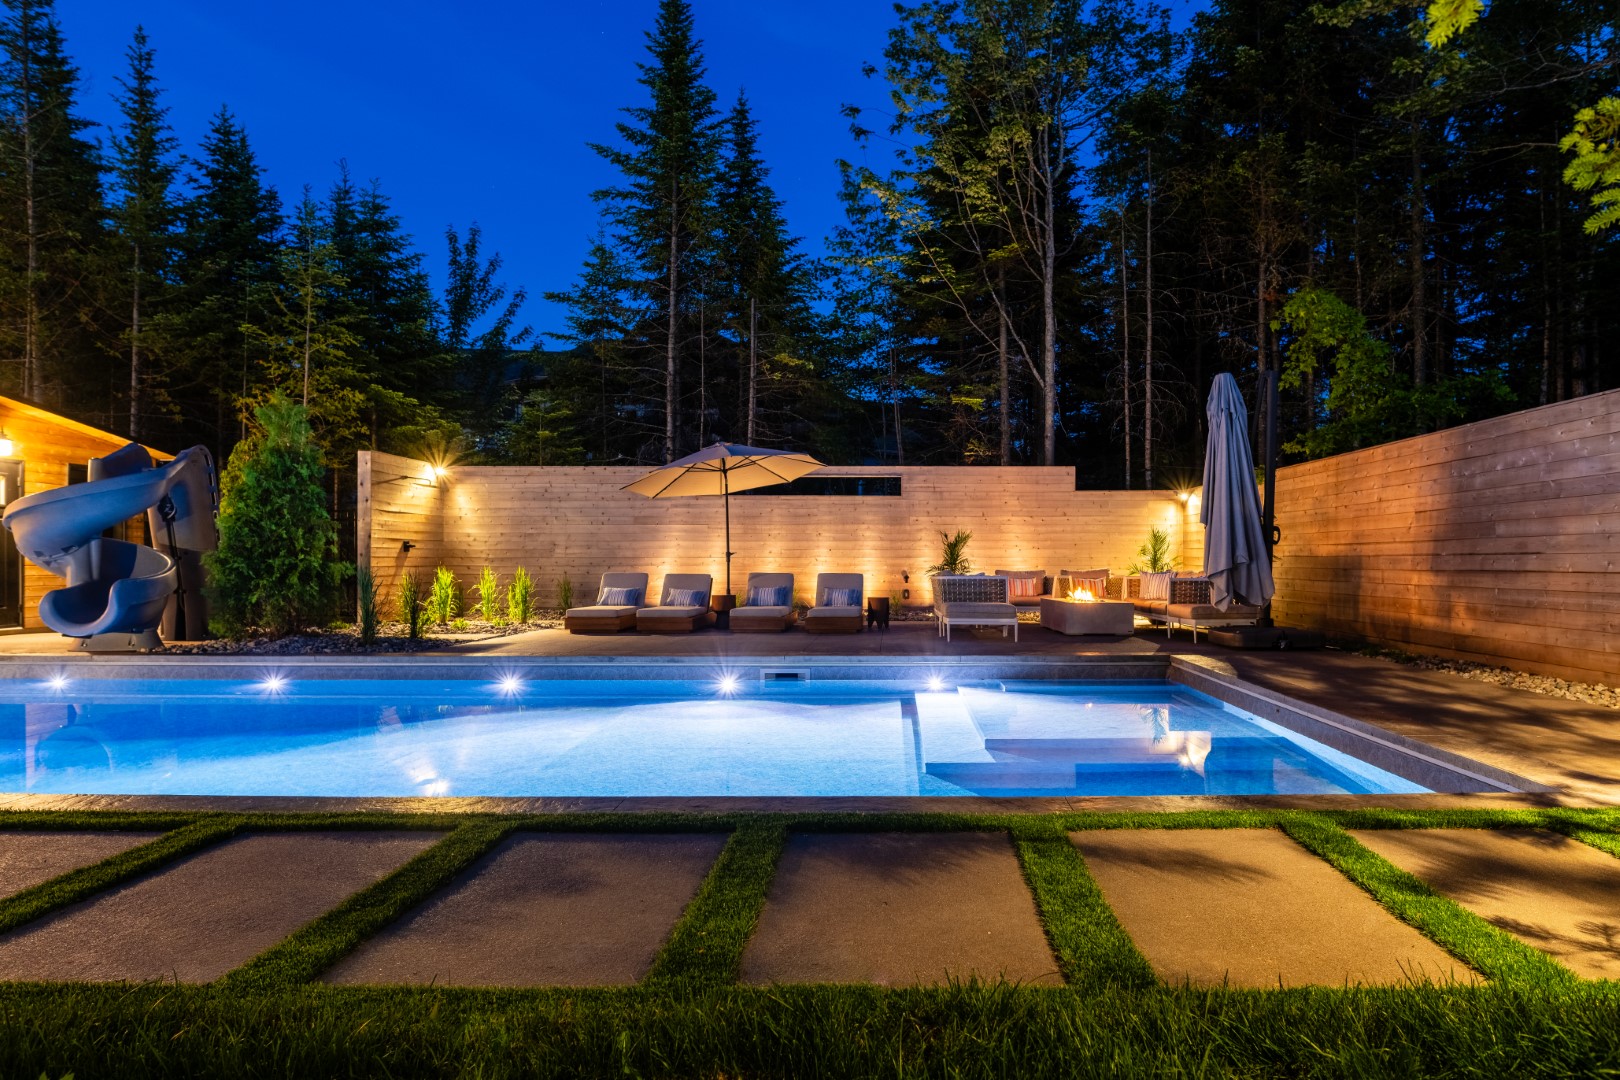 Seating area lit up at night both in garden and pool underwater lighting at Moncton residence